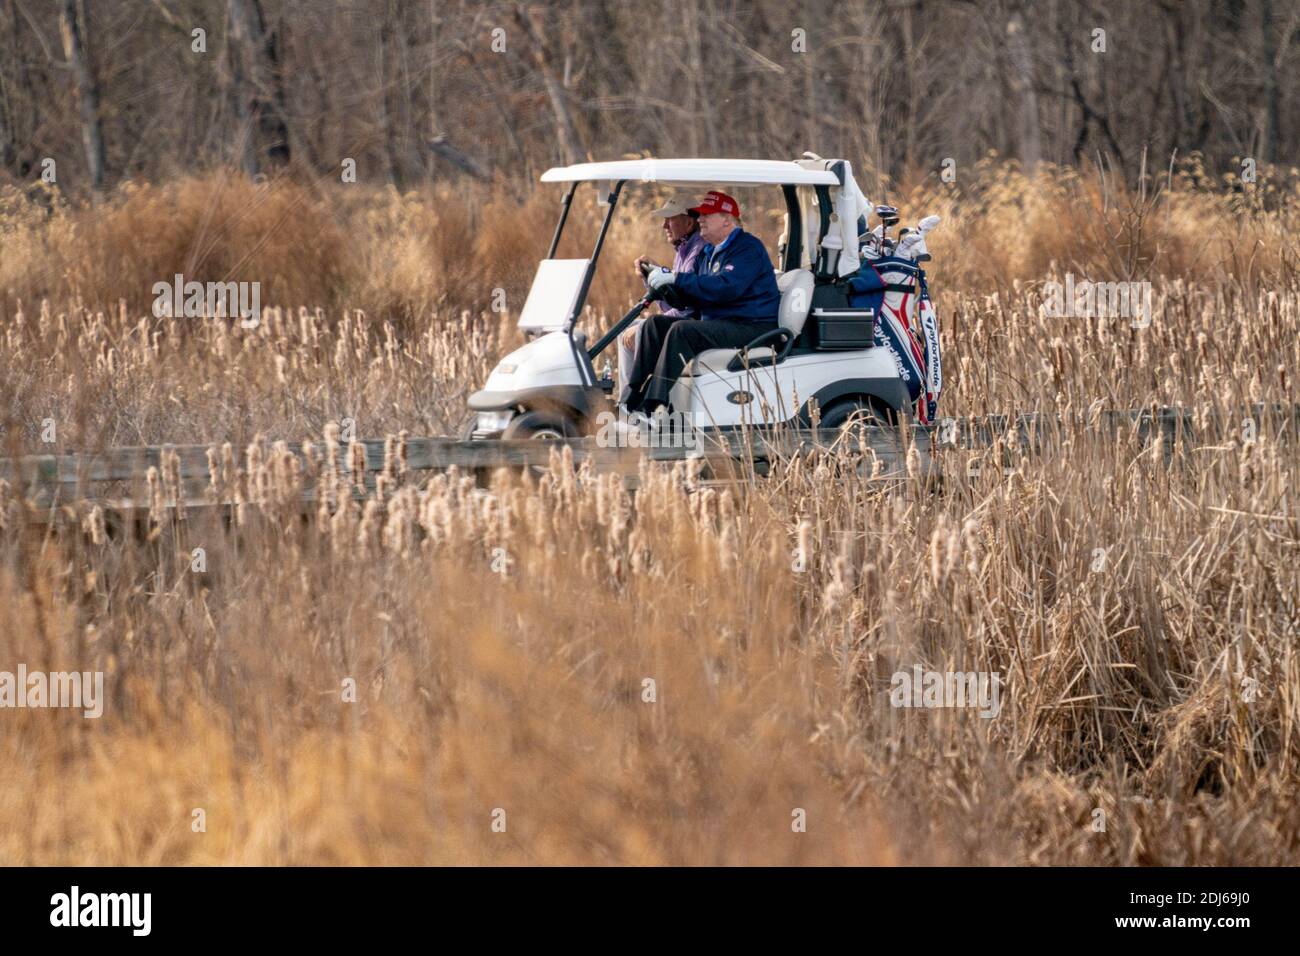 Washington, United States. 13th Dec, 2020. United States President Donald J. Trump drives his golf cart, number 45, as he plays golf at Trump National Golf Club in Sterling, Virginia on Sunday, December 13, 2020. Photo by Ken Cedeno/UPI Credit: UPI/Alamy Live News Stock Photo